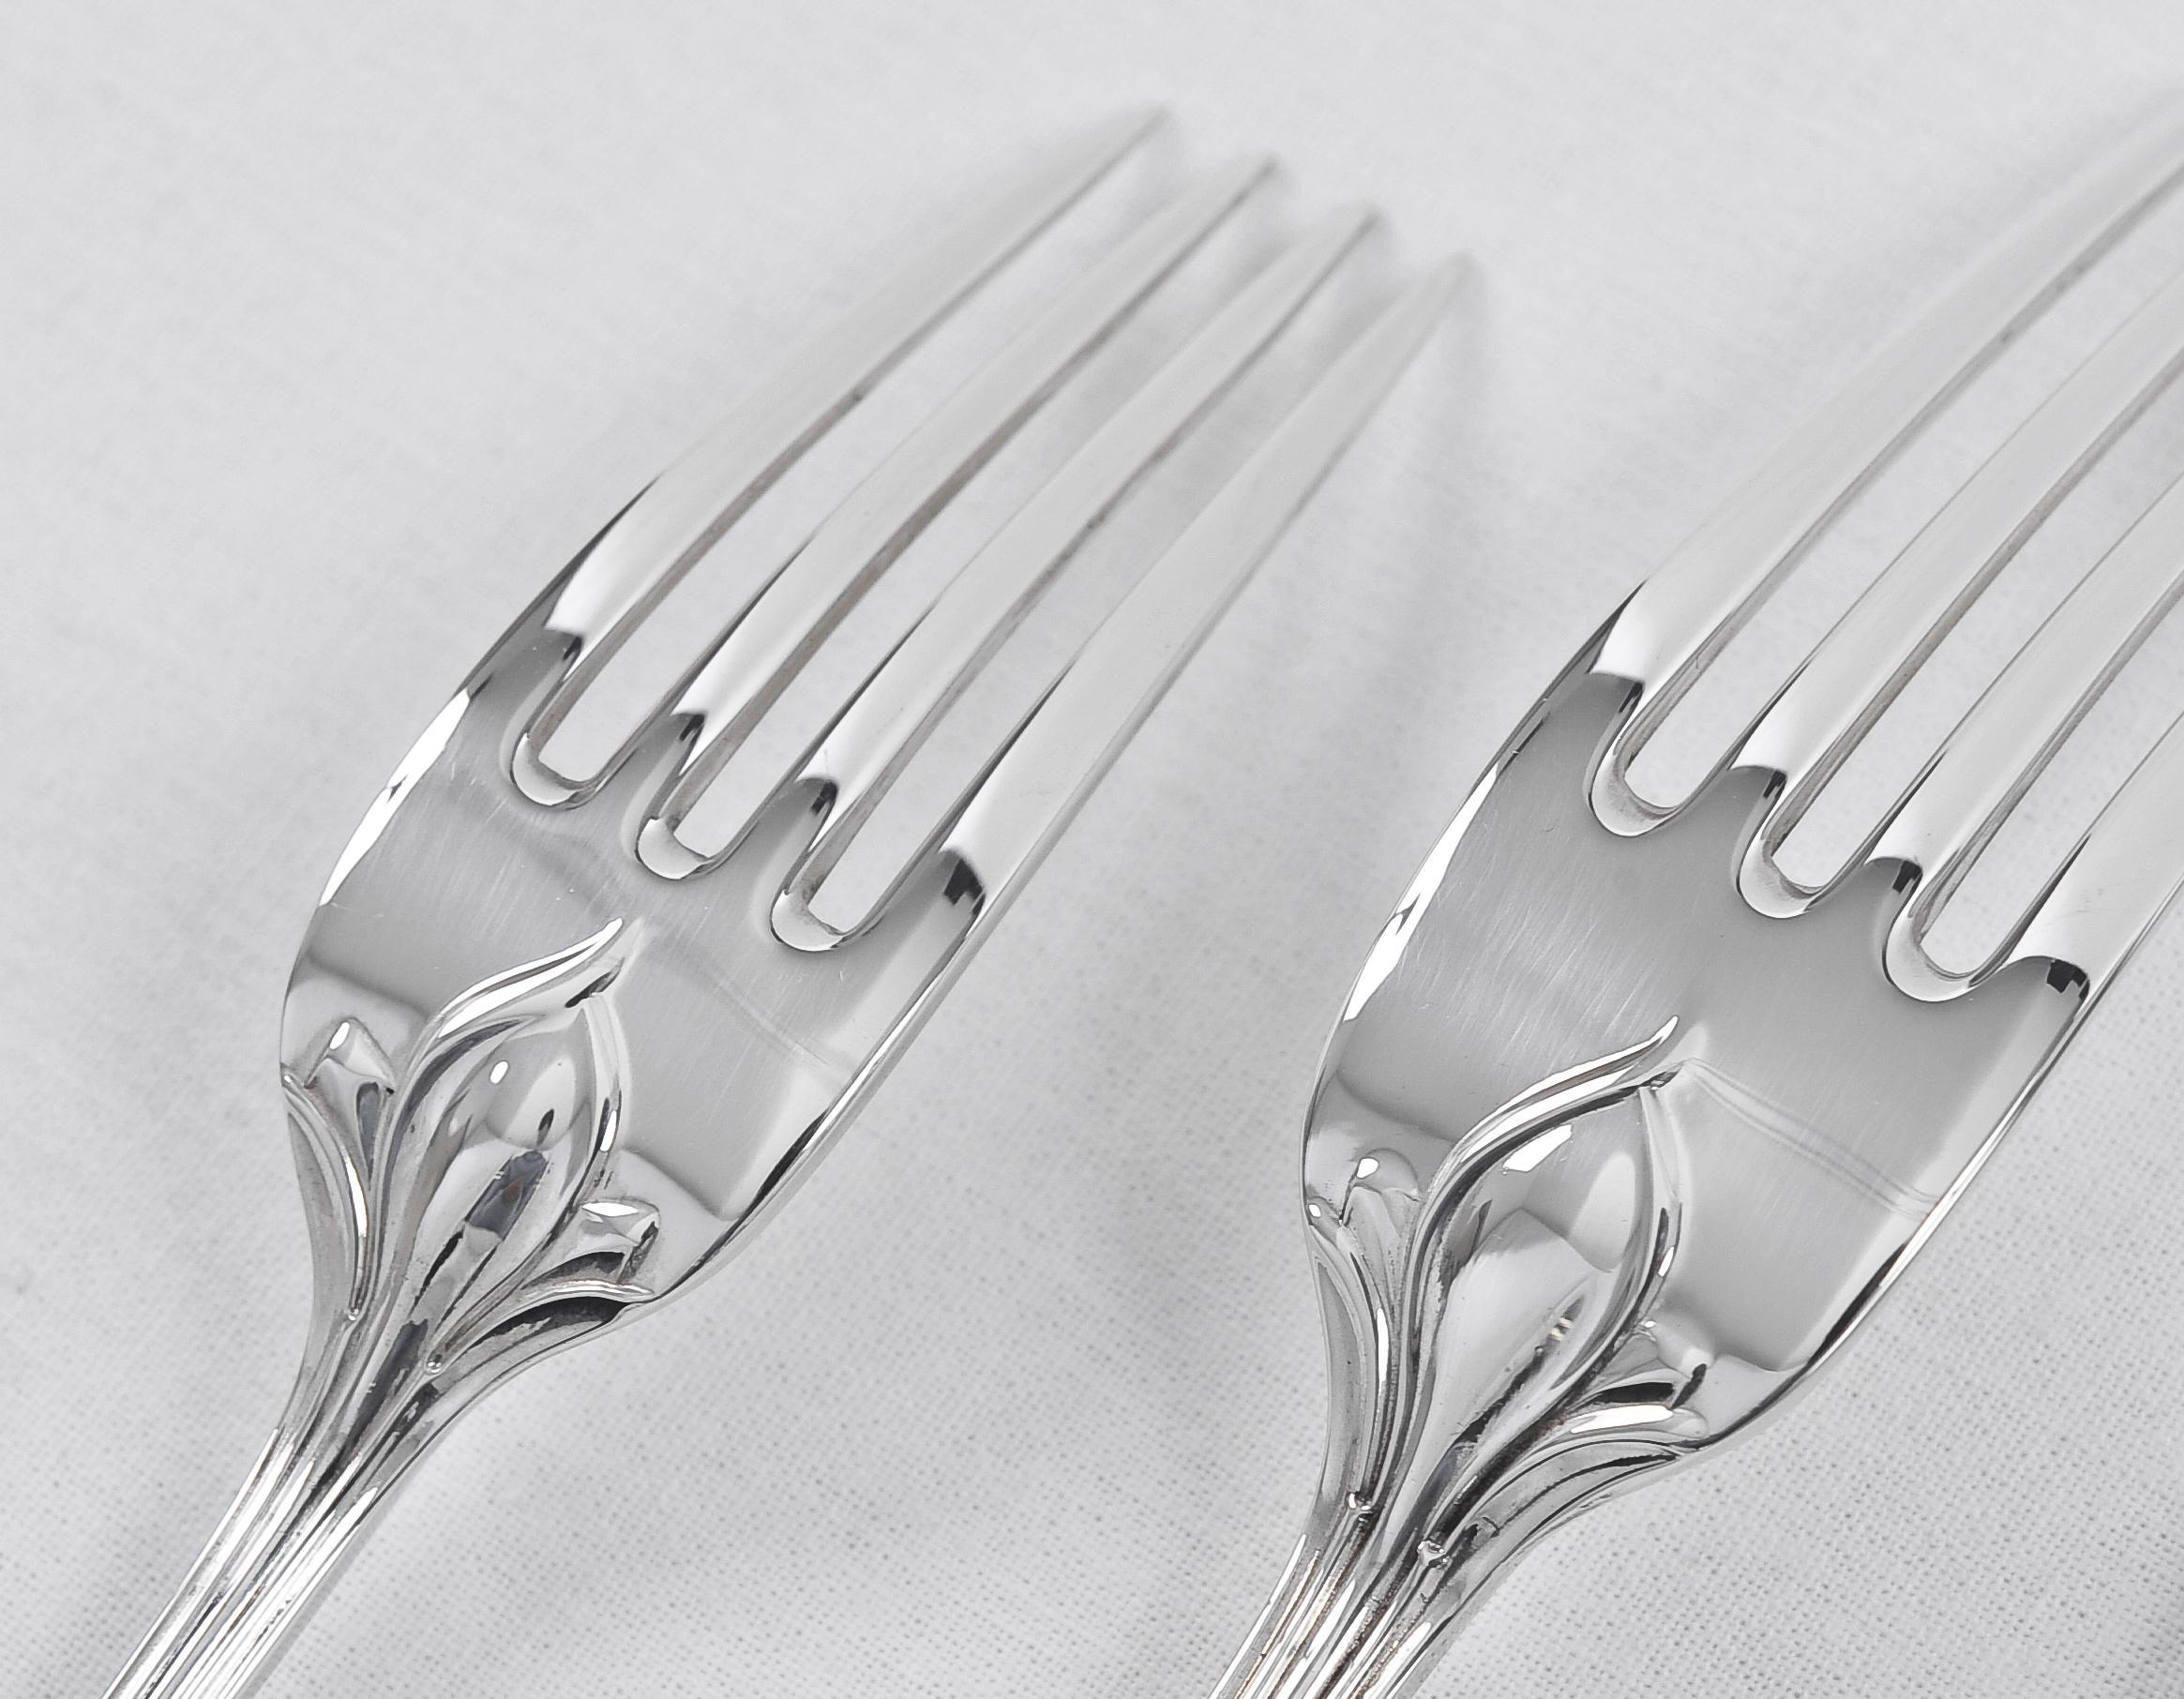 One Date and Maker, Hand Forged Lily Silver Cutlery 1